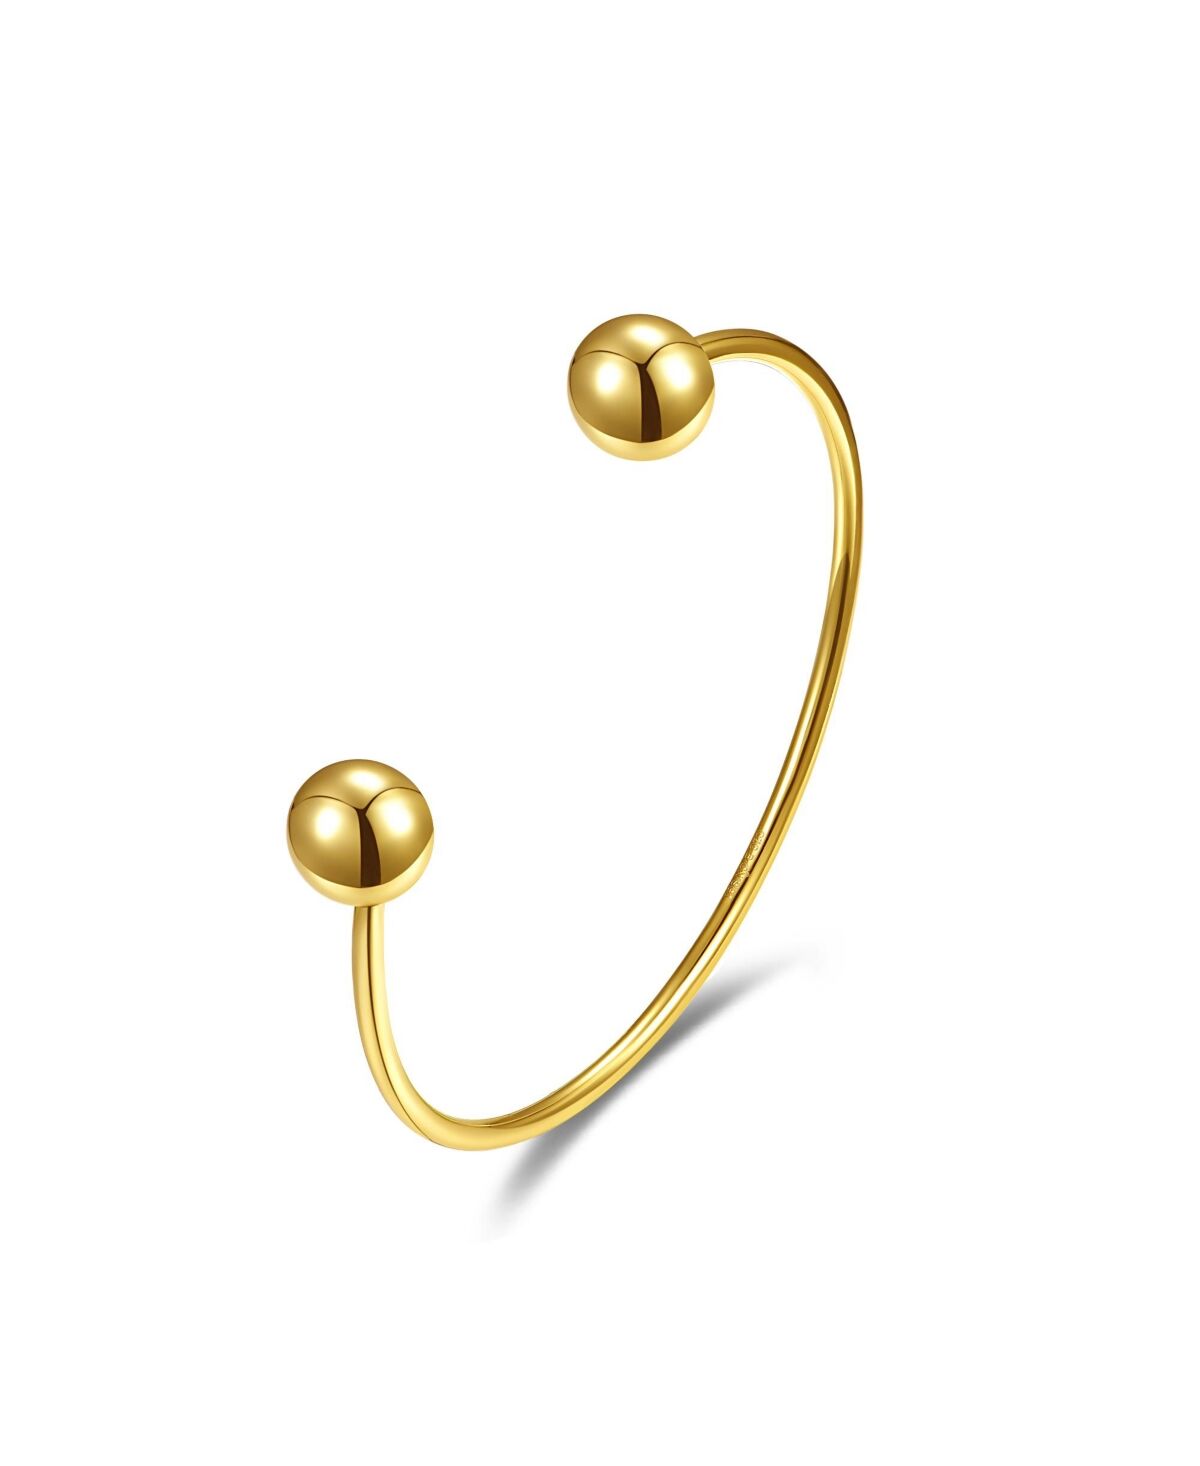 Gigigirl Gigi Girl Teens/Young Adults 14k Yellow Gold Plated Ball Capped Open Cuff Bangle Bracelet - Gold